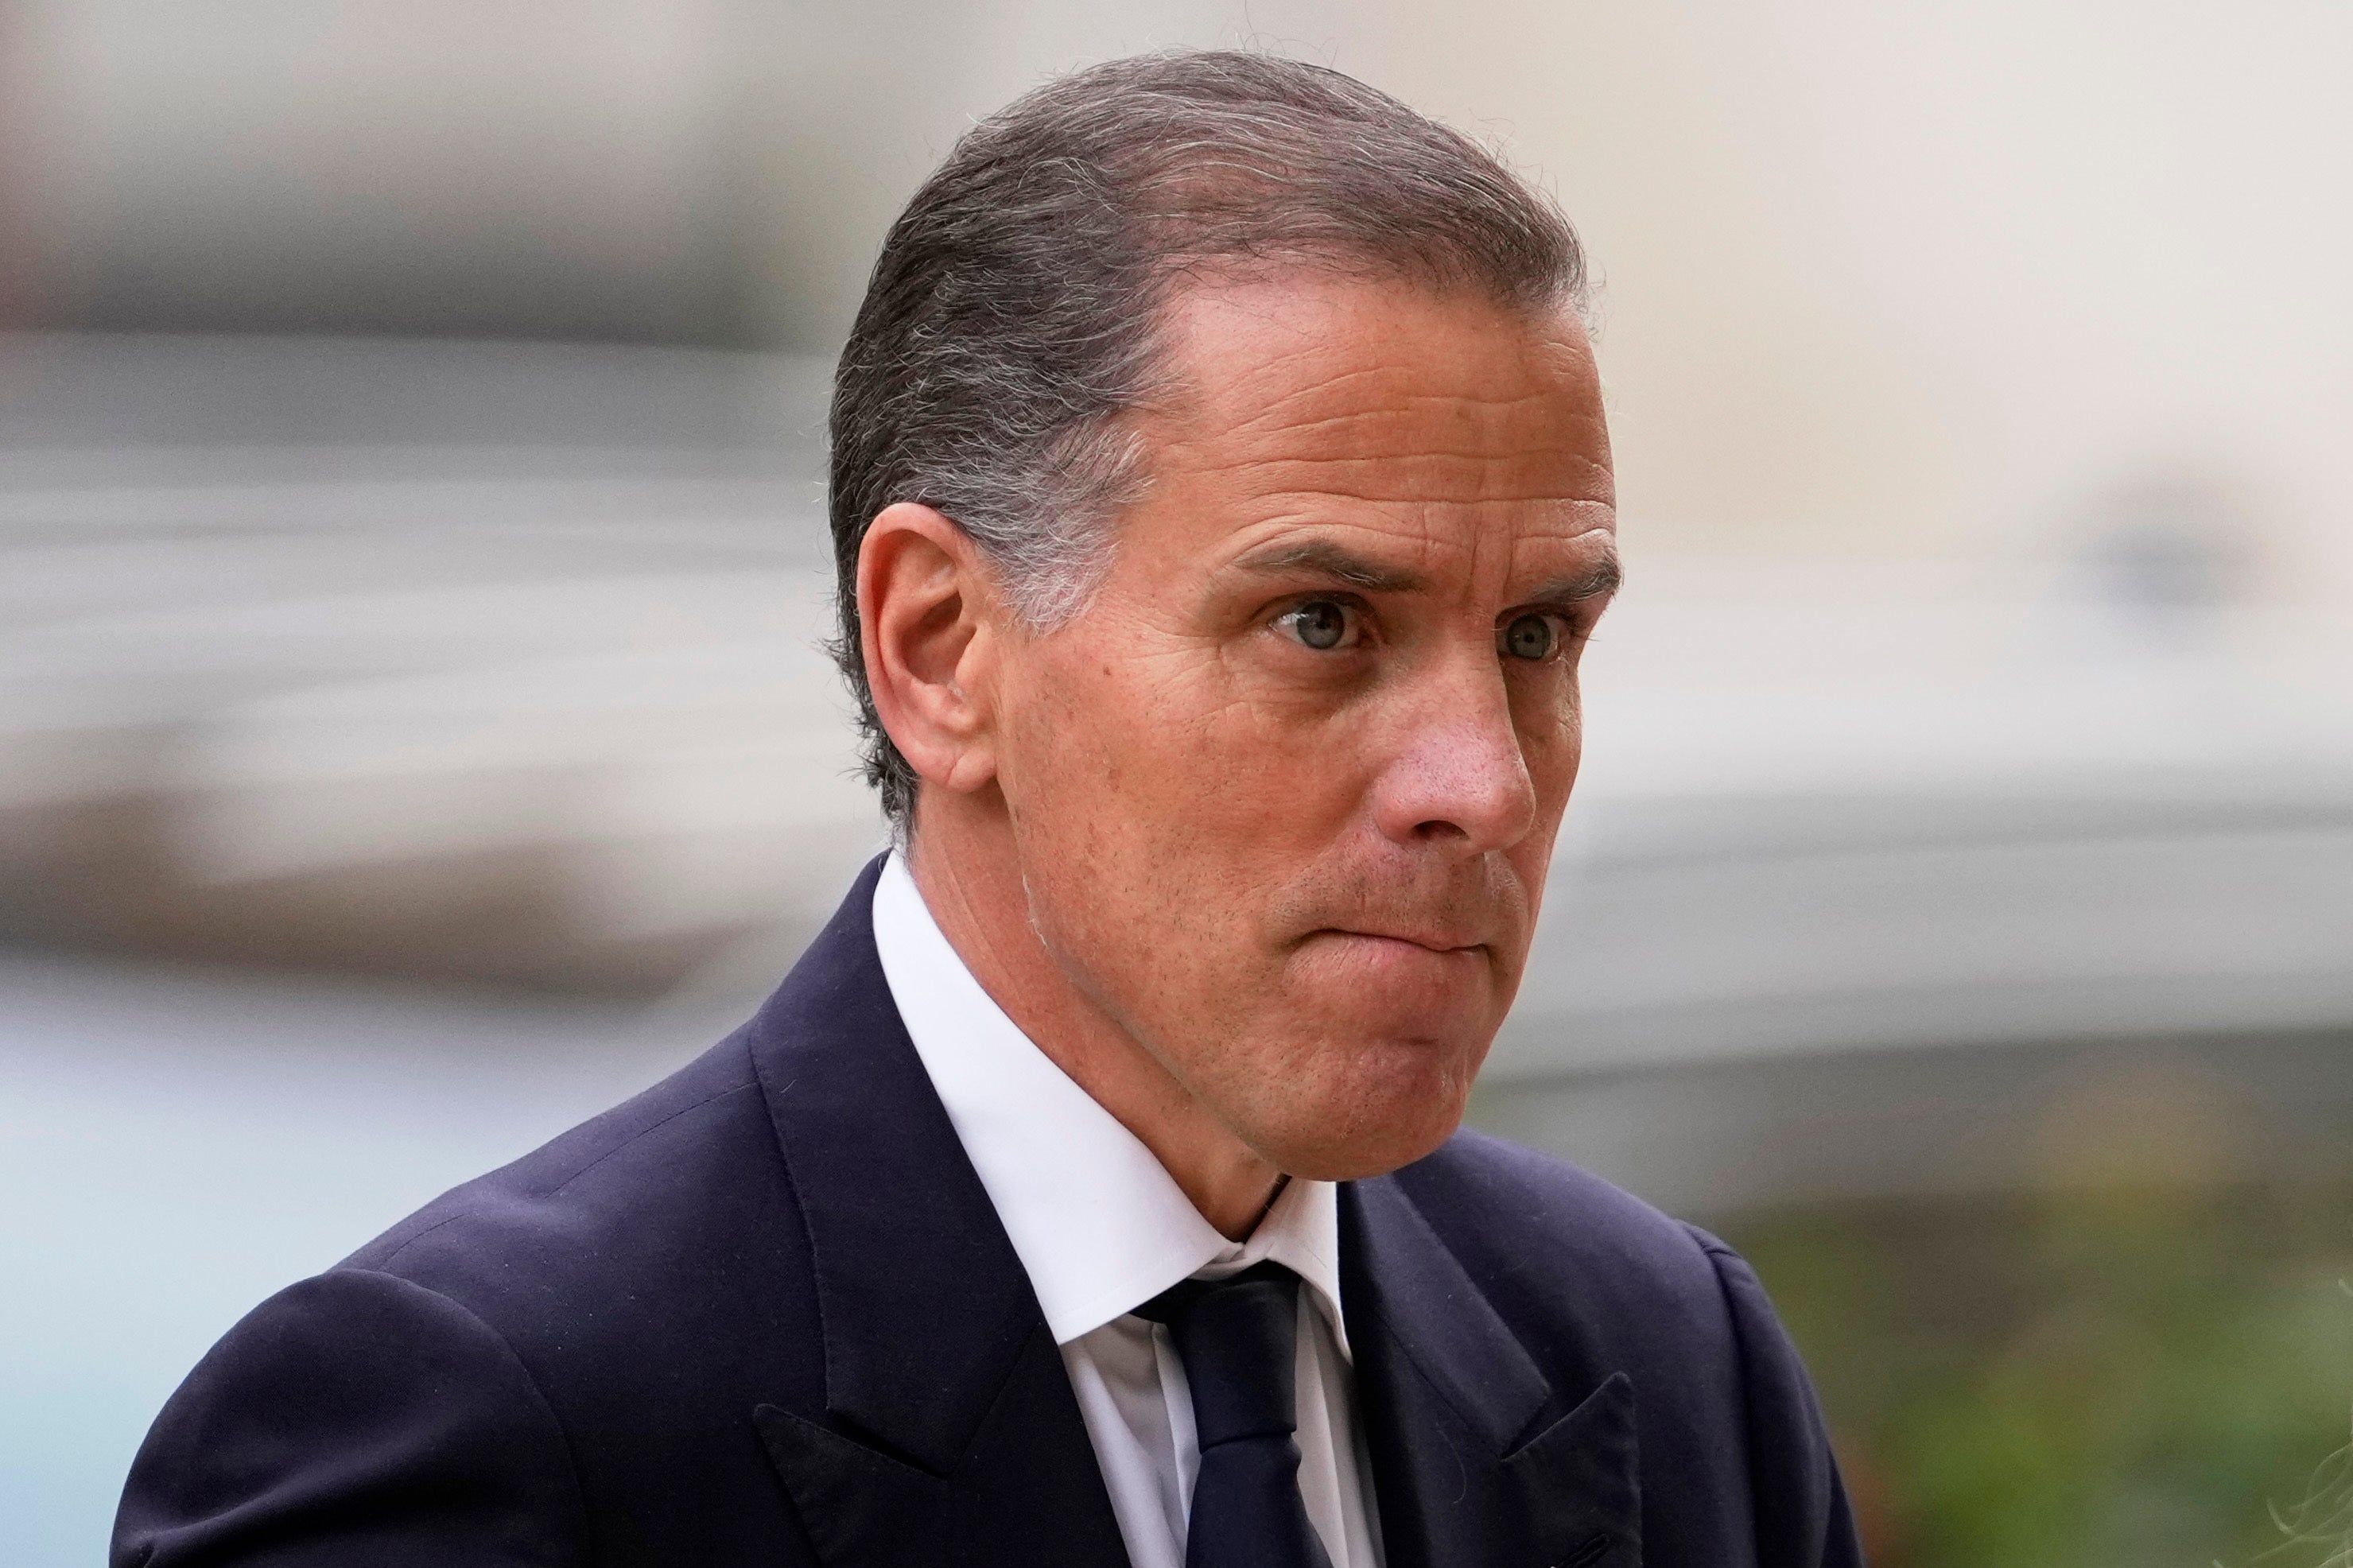 Hunter Biden pictured entering court for his trial on felony gun charges 6 June. His father, President Joe Biden, says he will not pardon him if convicted